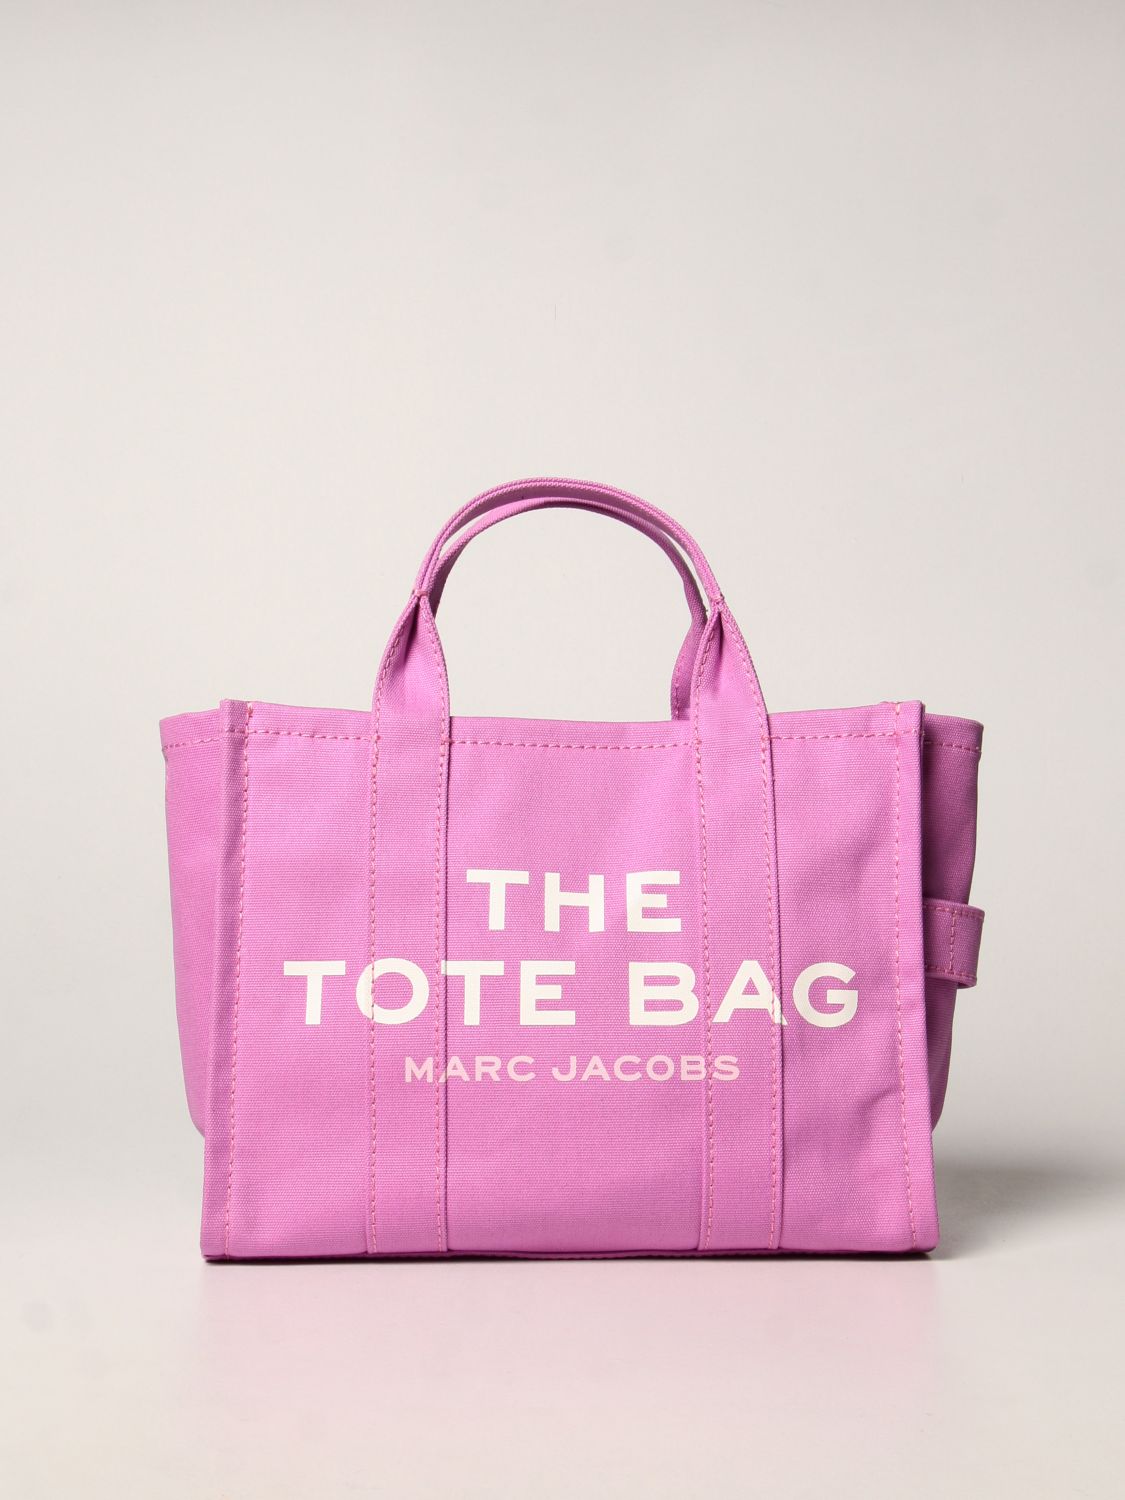 MARC JACOBS: The Tote Bag in canvas - Cyclamen | Marc Jacobs tote bags ...